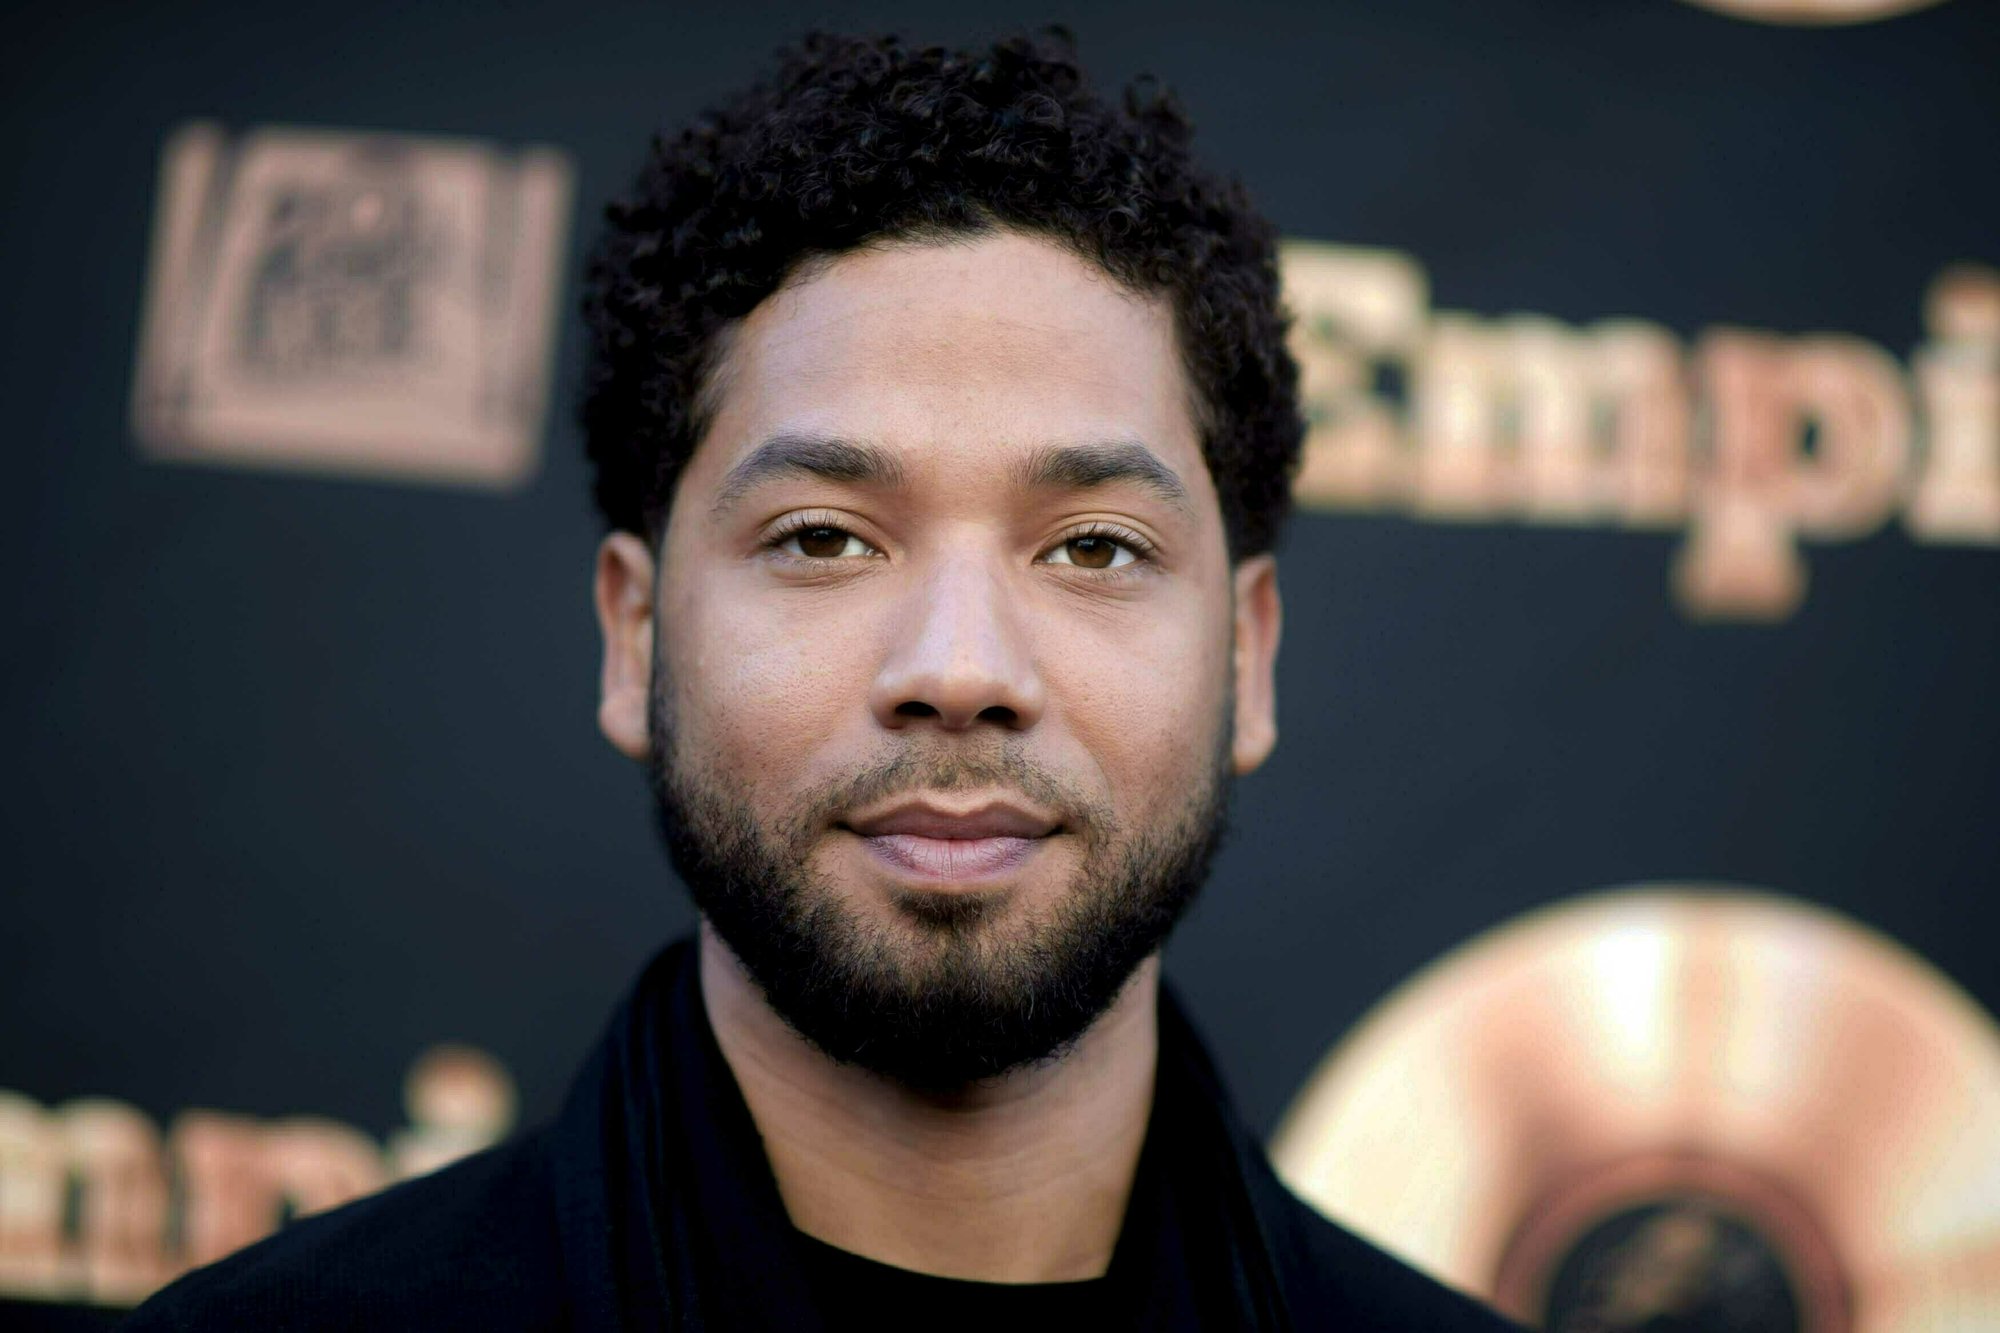 FILE - In this May 20, 2016 file photo, actor and singer Jussie Smollett attends the "Empire" FYC Event in Los Angeles. Chicago police said Sunday, Feb. 17, 2019, they're still seeking a follow-up interview with Smollett after receiving new information that "shifted" their investigation of a reported attack on the "Empire" actor. (Richard Shotwell/Invision/AP, File)